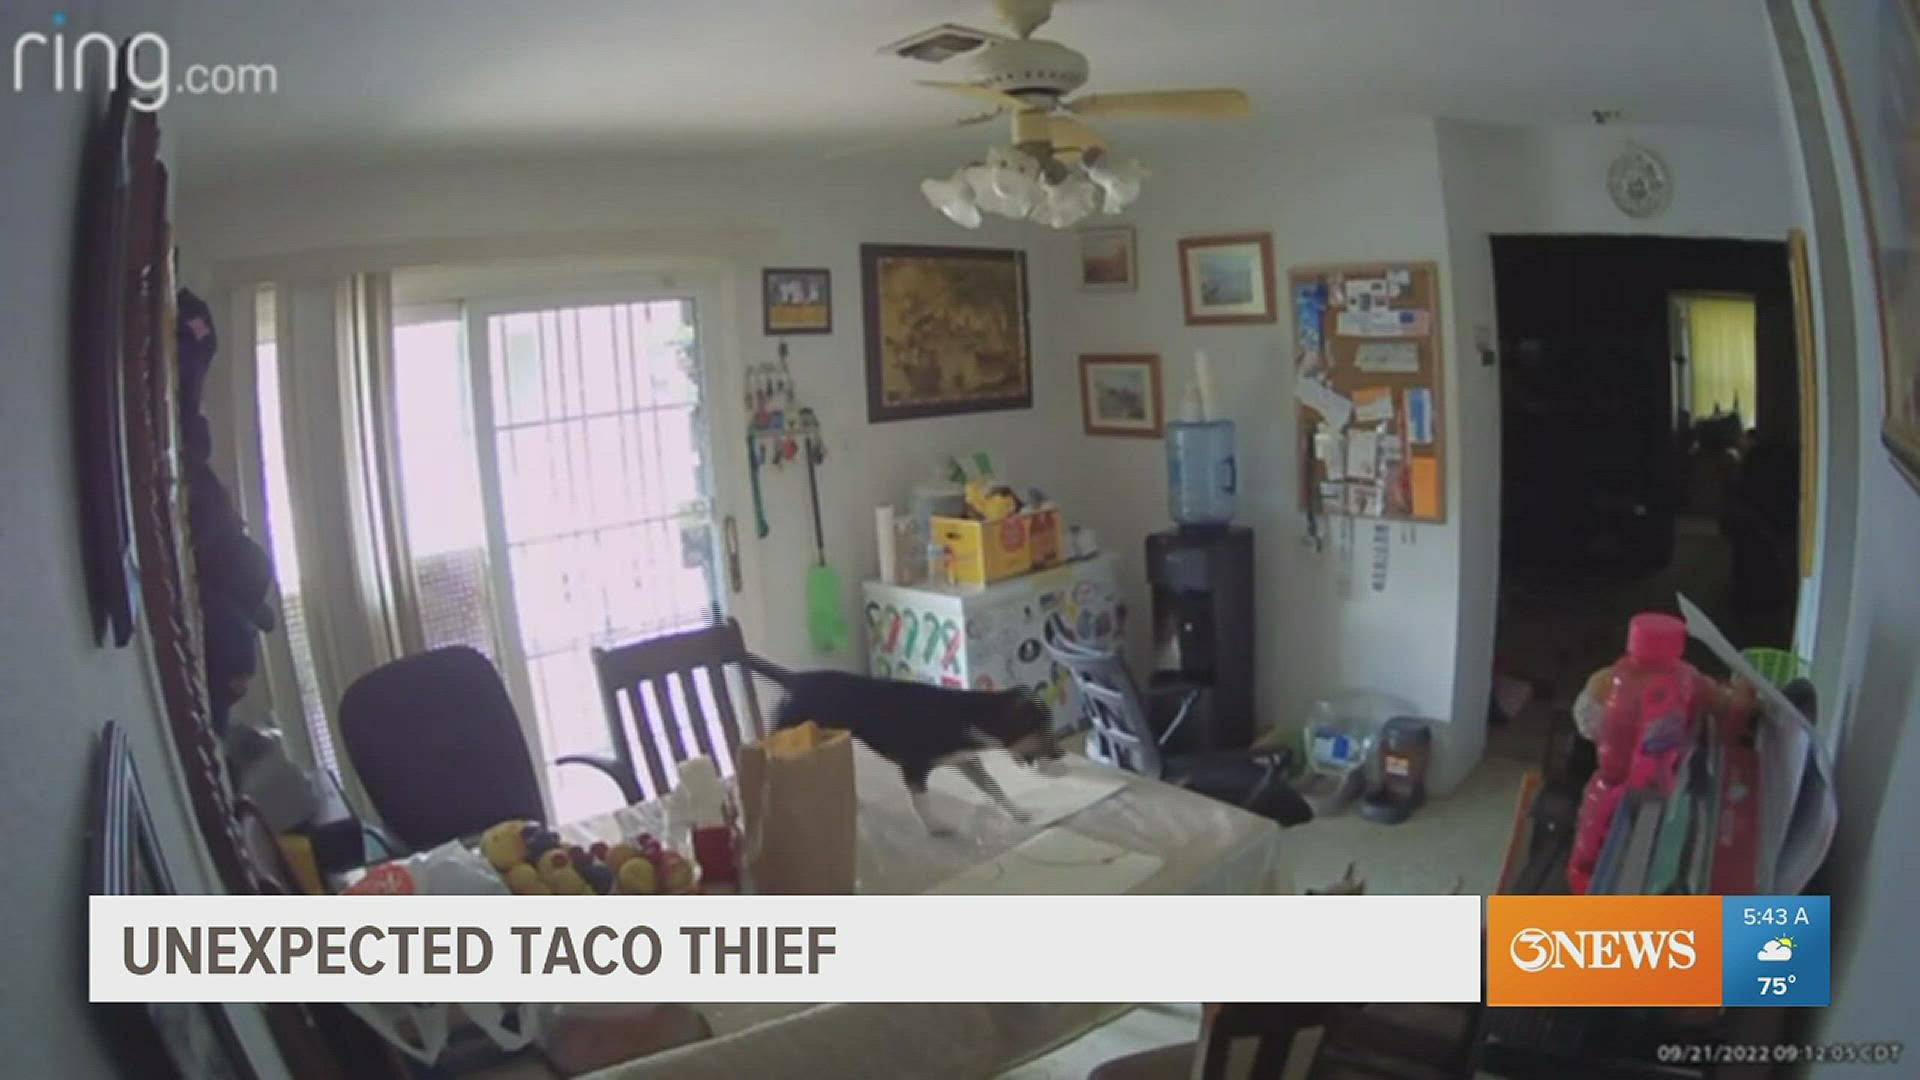 This Texas dog was caught on camera stealing his owner's breakfast taco off a dining room table.